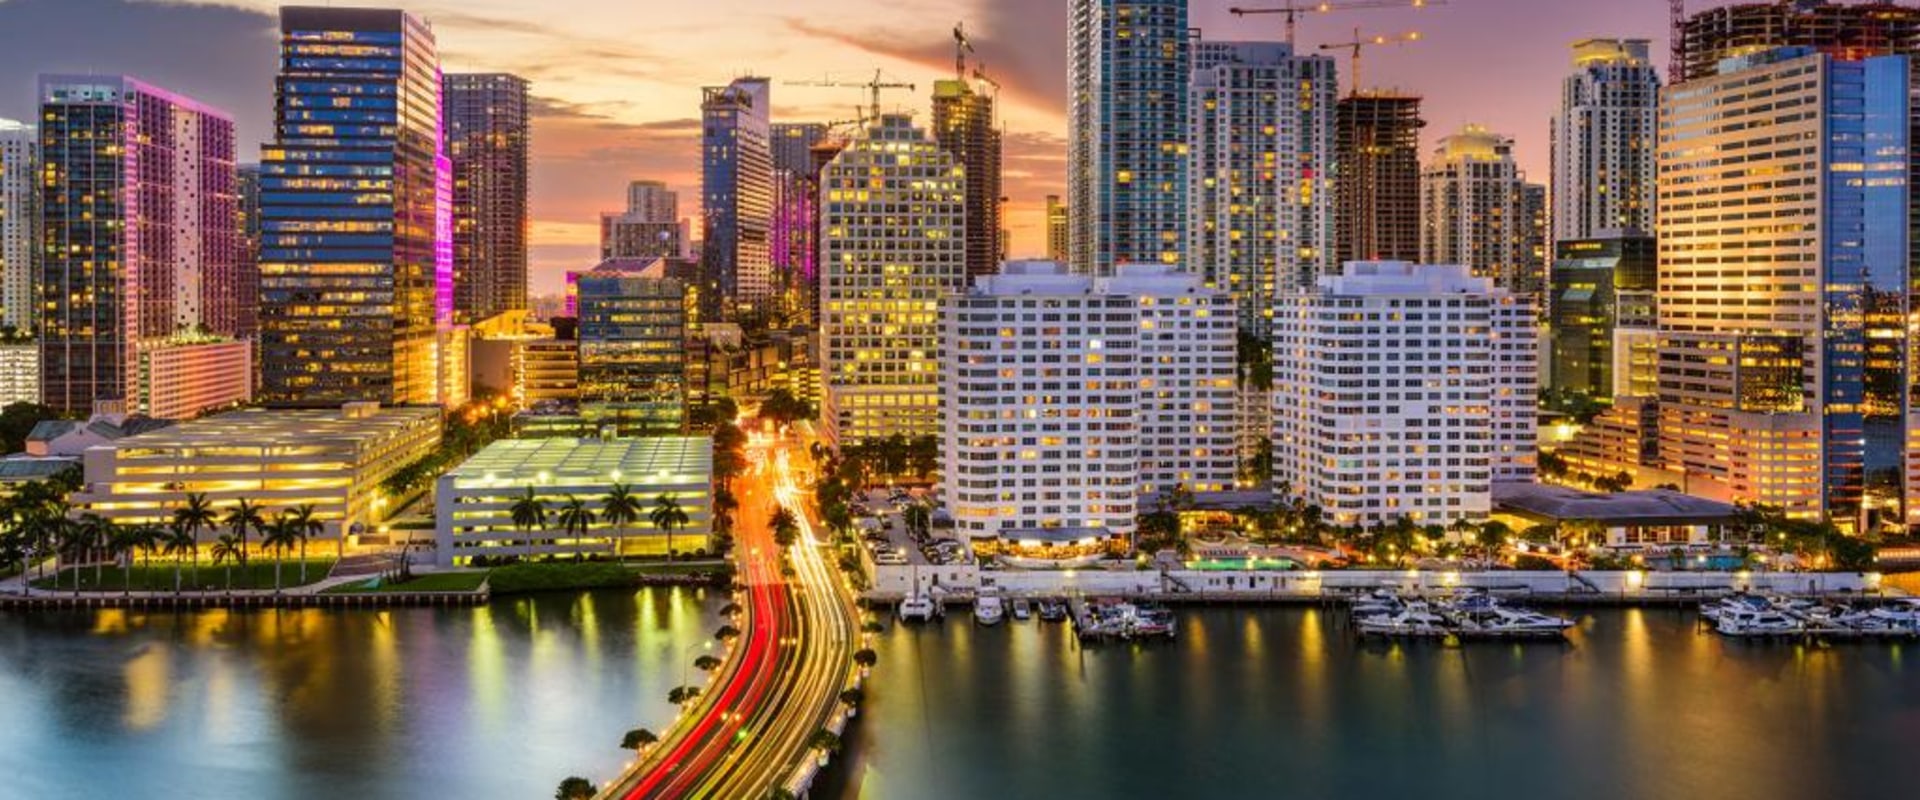 Vehicle Shipping Companies in Miami: What You Need to Know